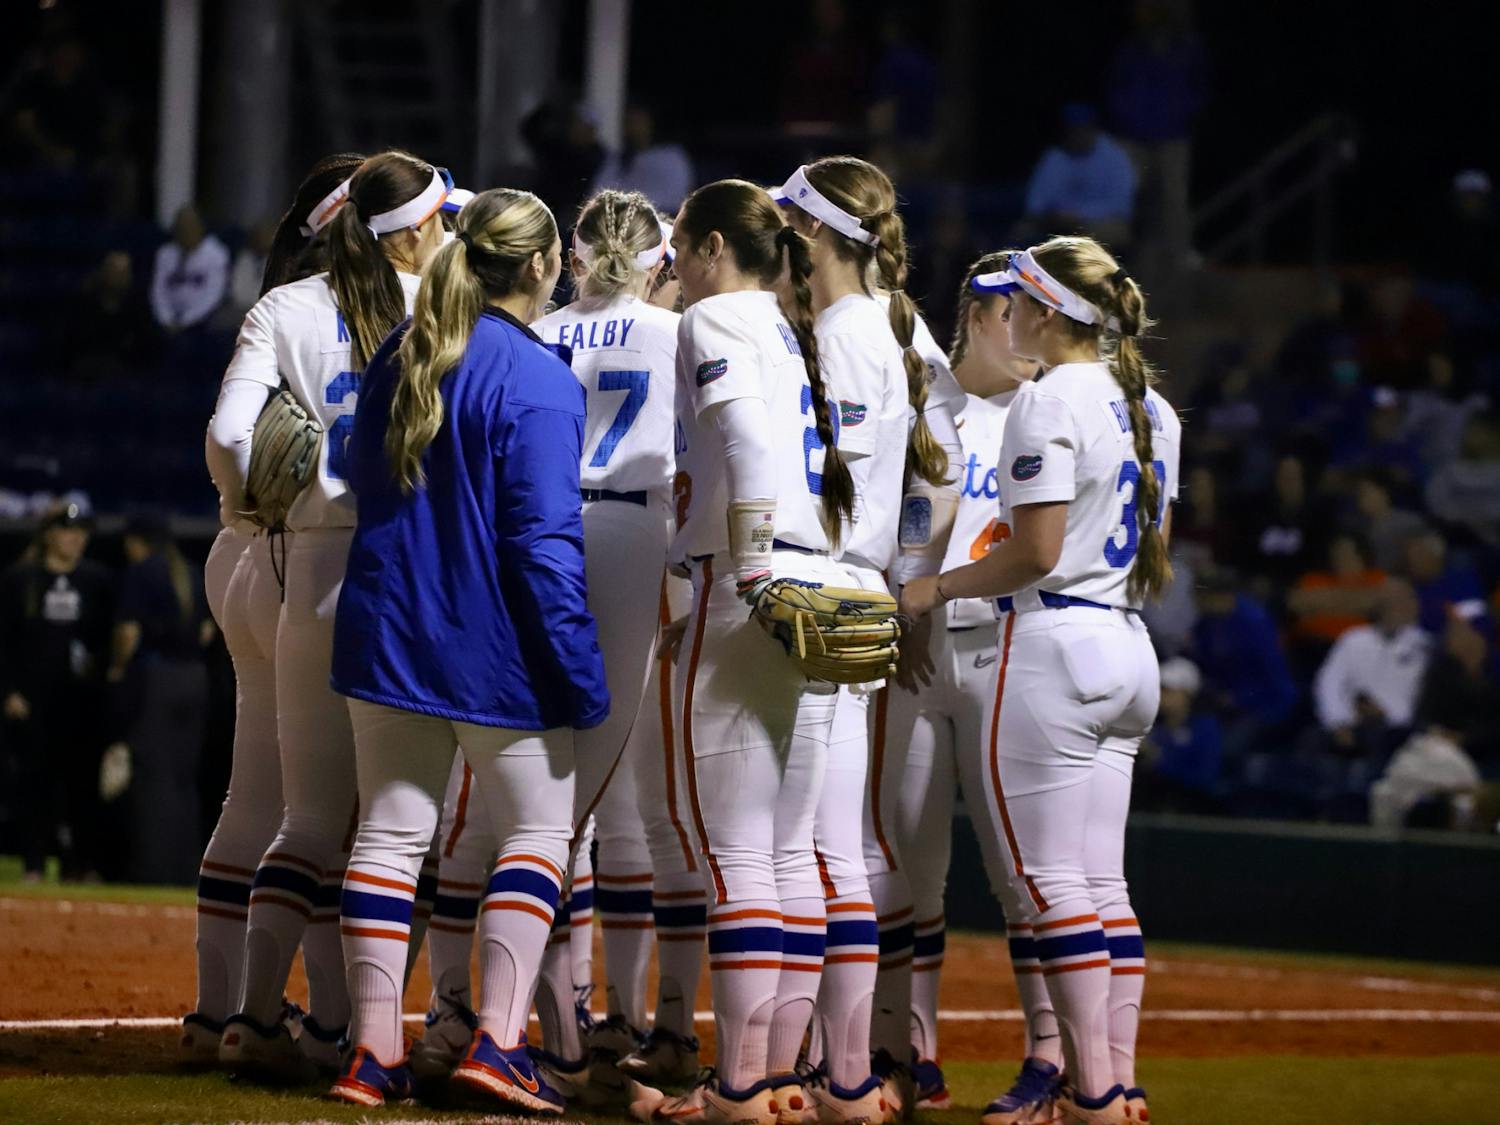 Florida softball huddles on the field to talk strategy against Mississippi State on March 14, 2022. The Gators compiled too many errors Friday night, falling to No. 7 Arkansas by a 9-1 score.